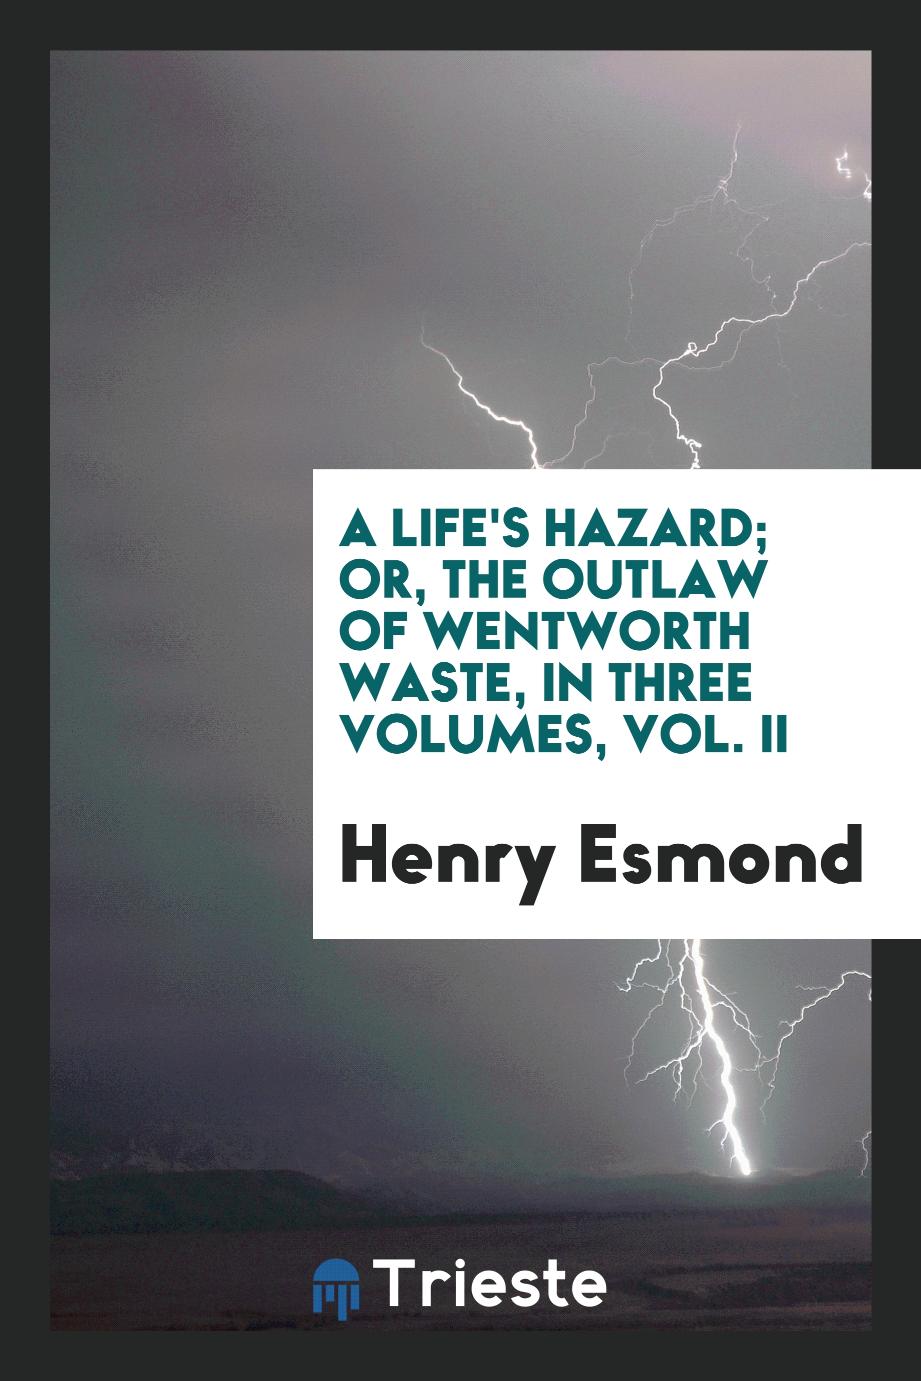 Henry Esmond - A life's hazard; or, the outlaw of Wentworth Waste, In Three Volumes, Vol. II